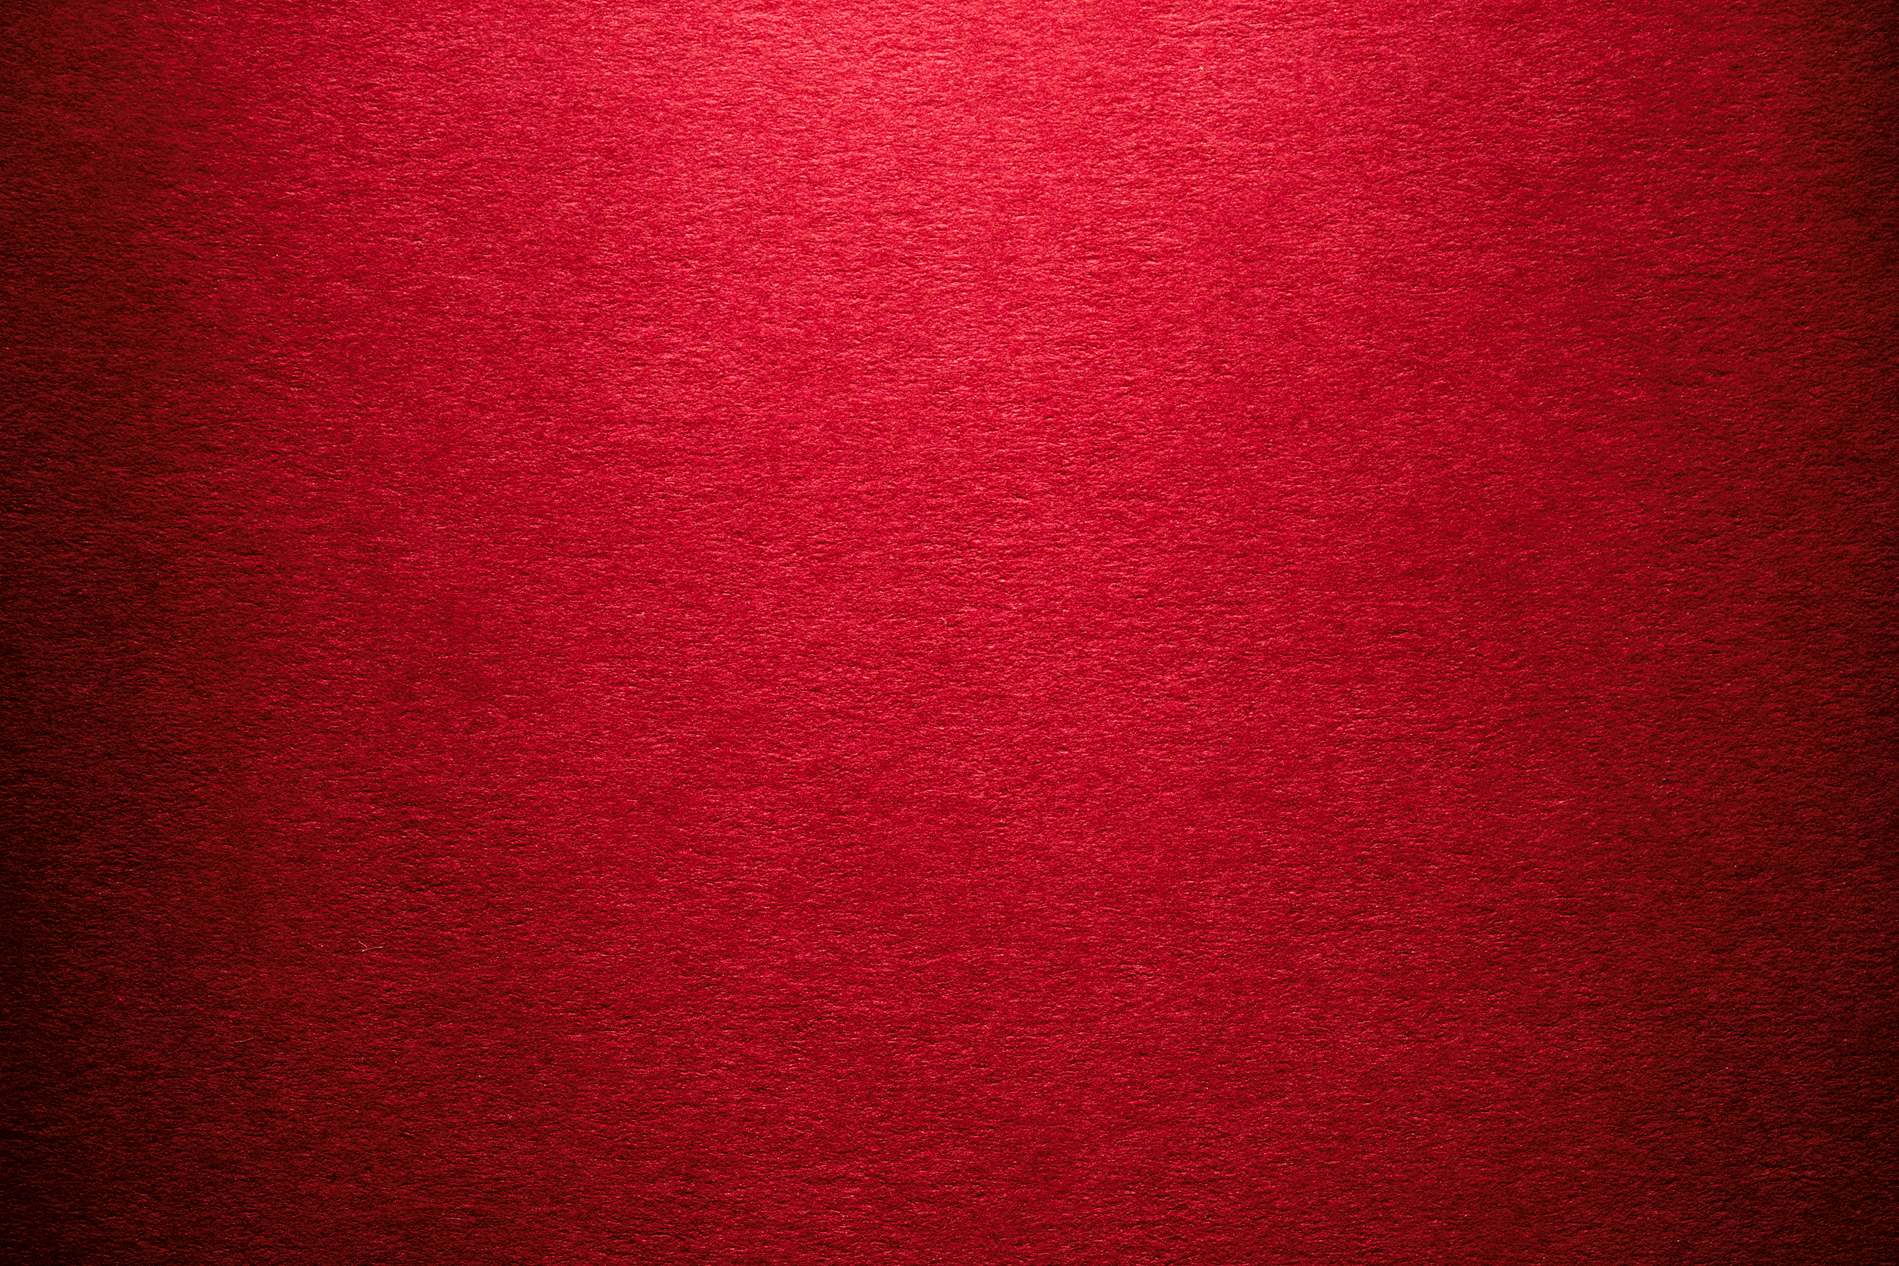 Red Wall Texture Background PhotoHDx